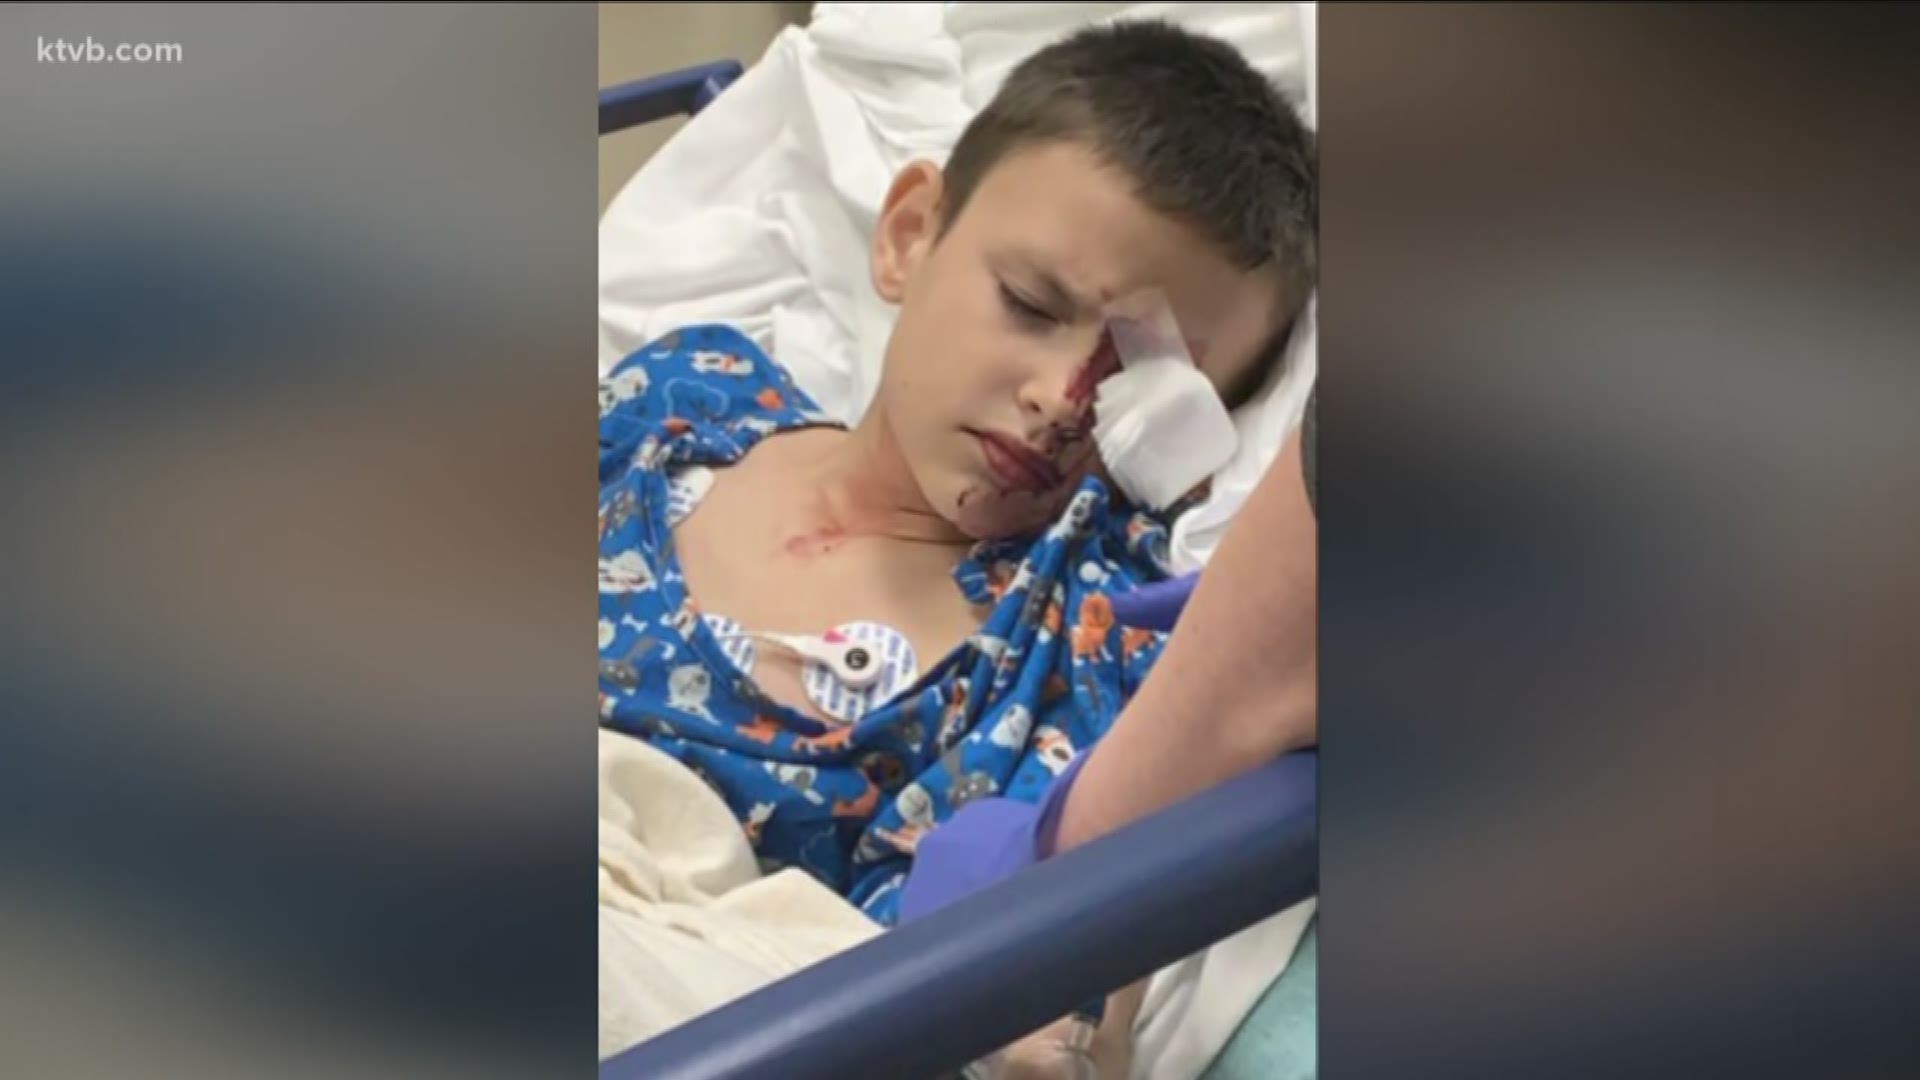 A freak mini-golf accident made a ten-year-old go blind in one eye, now he has to have surgery to remove it. But he hopes he can go back to wrestling next year,